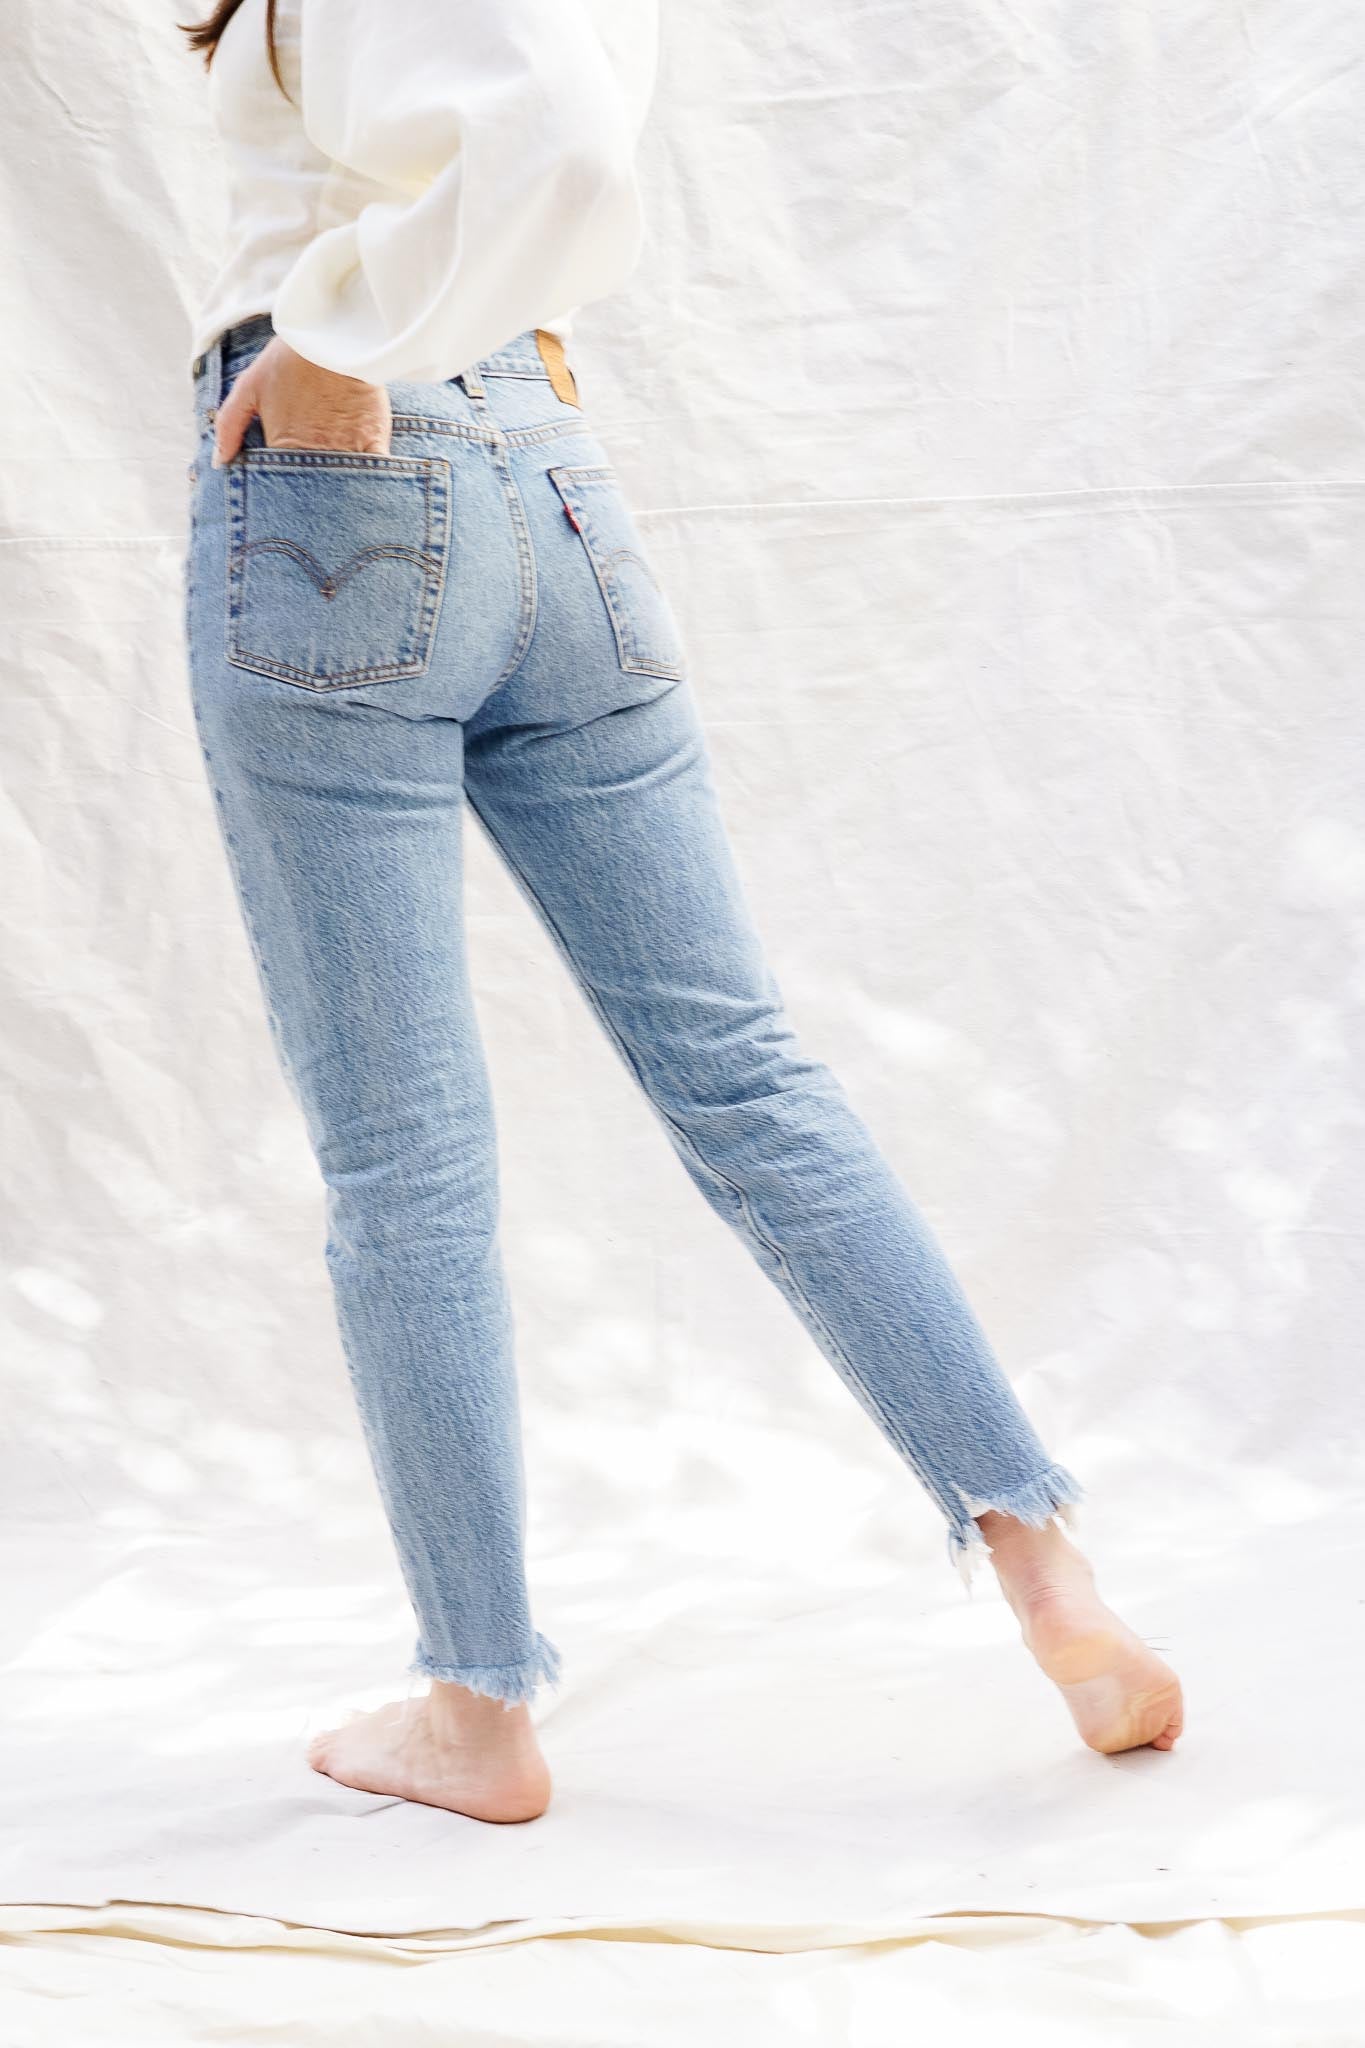 levi's wedgie icon high rise jeans shut up